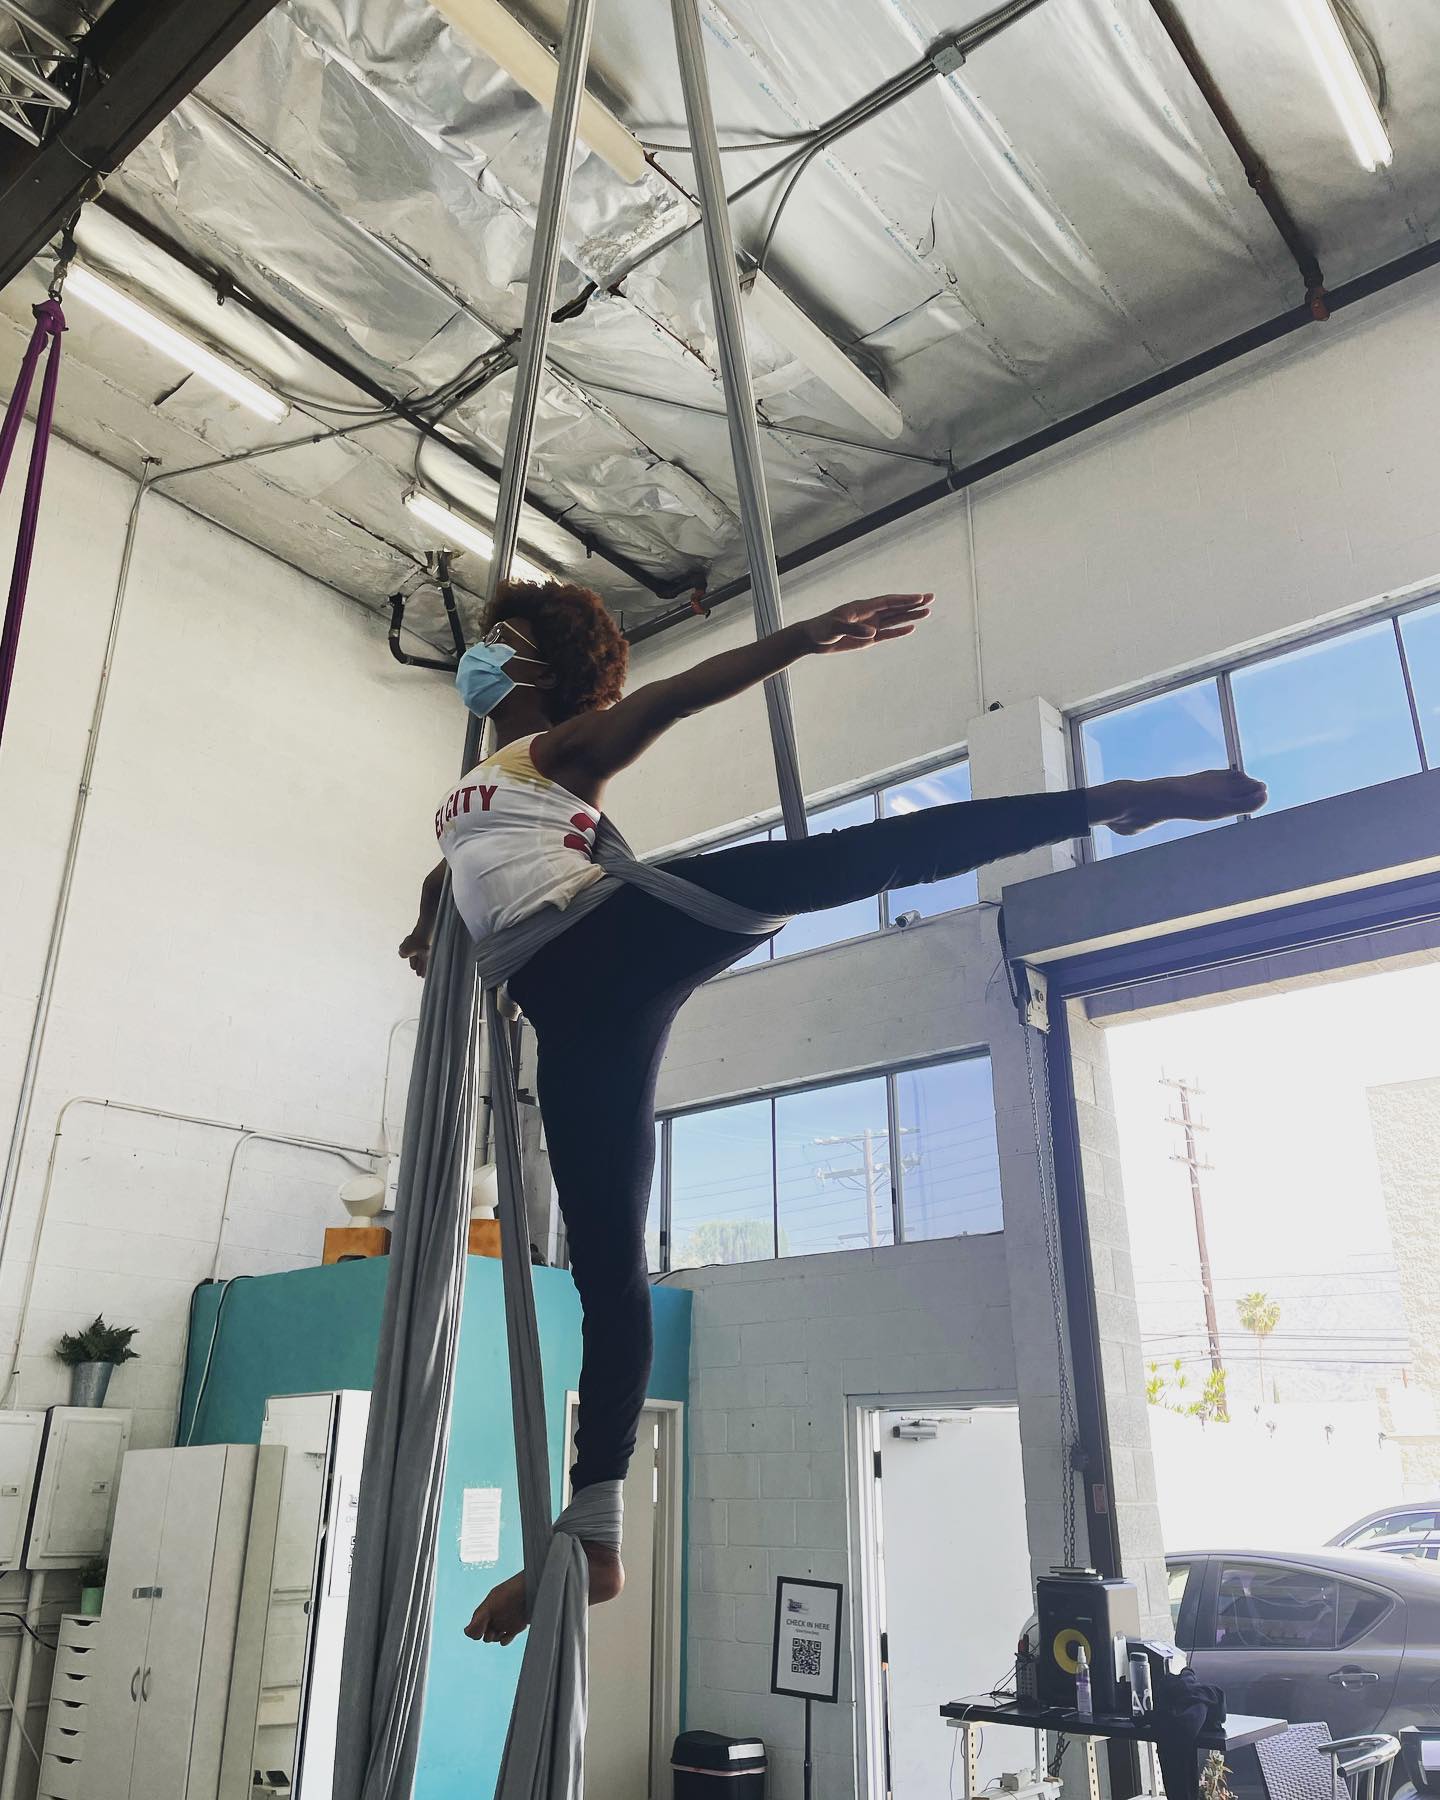 Making progress in silks this month. Today I was able to string together several sequences without feeling like I was dying, worked on some core skills, and had a good time. It truly feels good to get back to something that I love and create art at the same time! #aerialsilks #aerial #circus #arabesque #fitness #rdfitness #dietitiansofinstagram